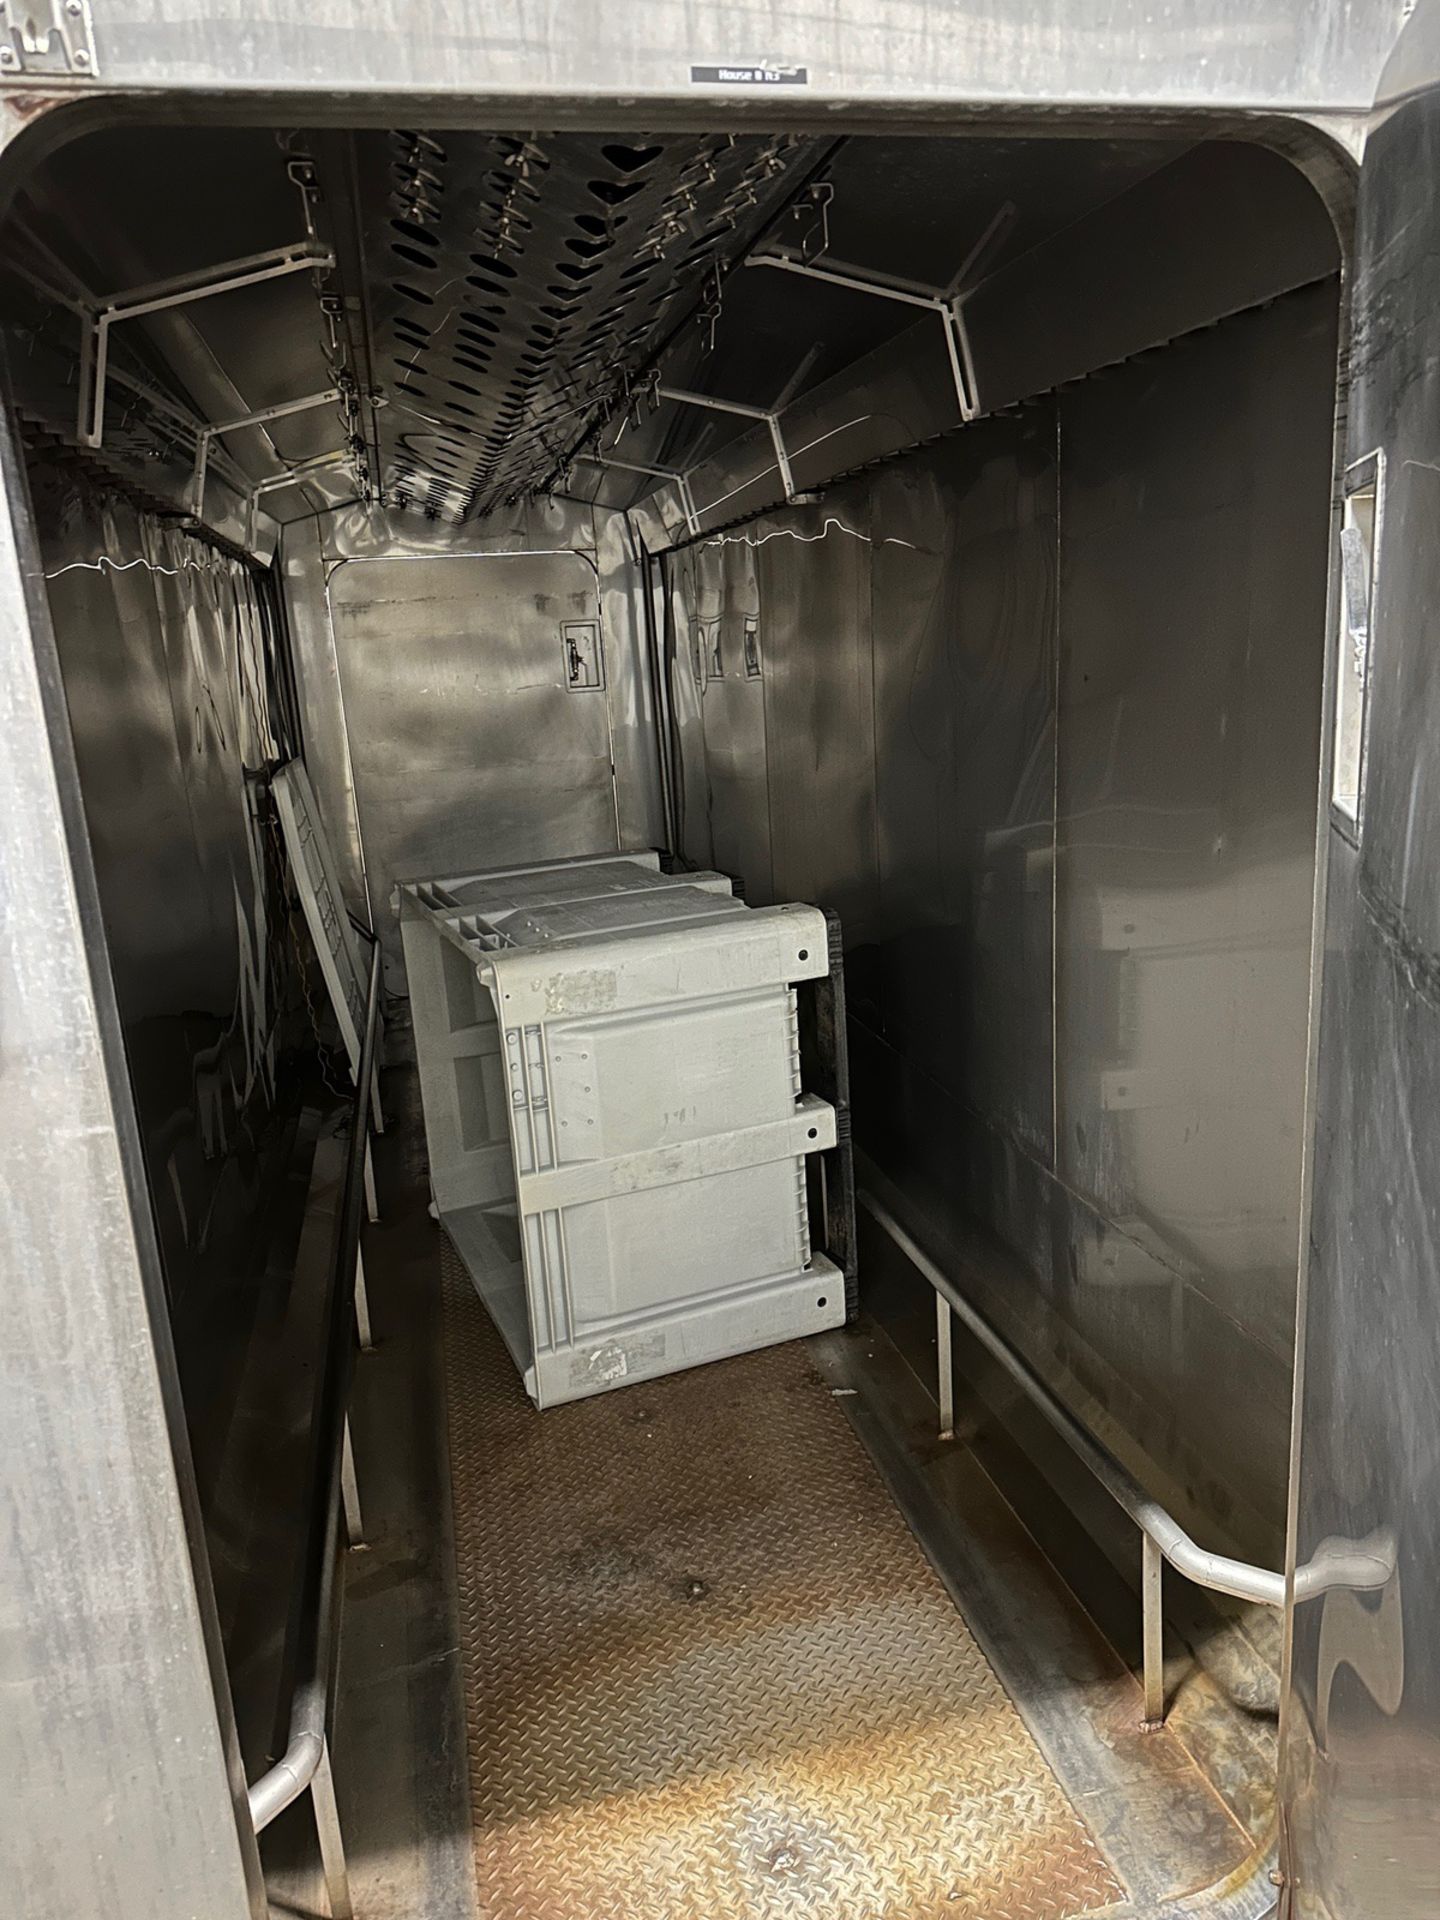 2018 Fusion Tech SM-04100-GP Oven / Smokehouse (Approx. 70" x 17'6" w 80" Wide Door) | Rig Fee $4500 - Image 2 of 4